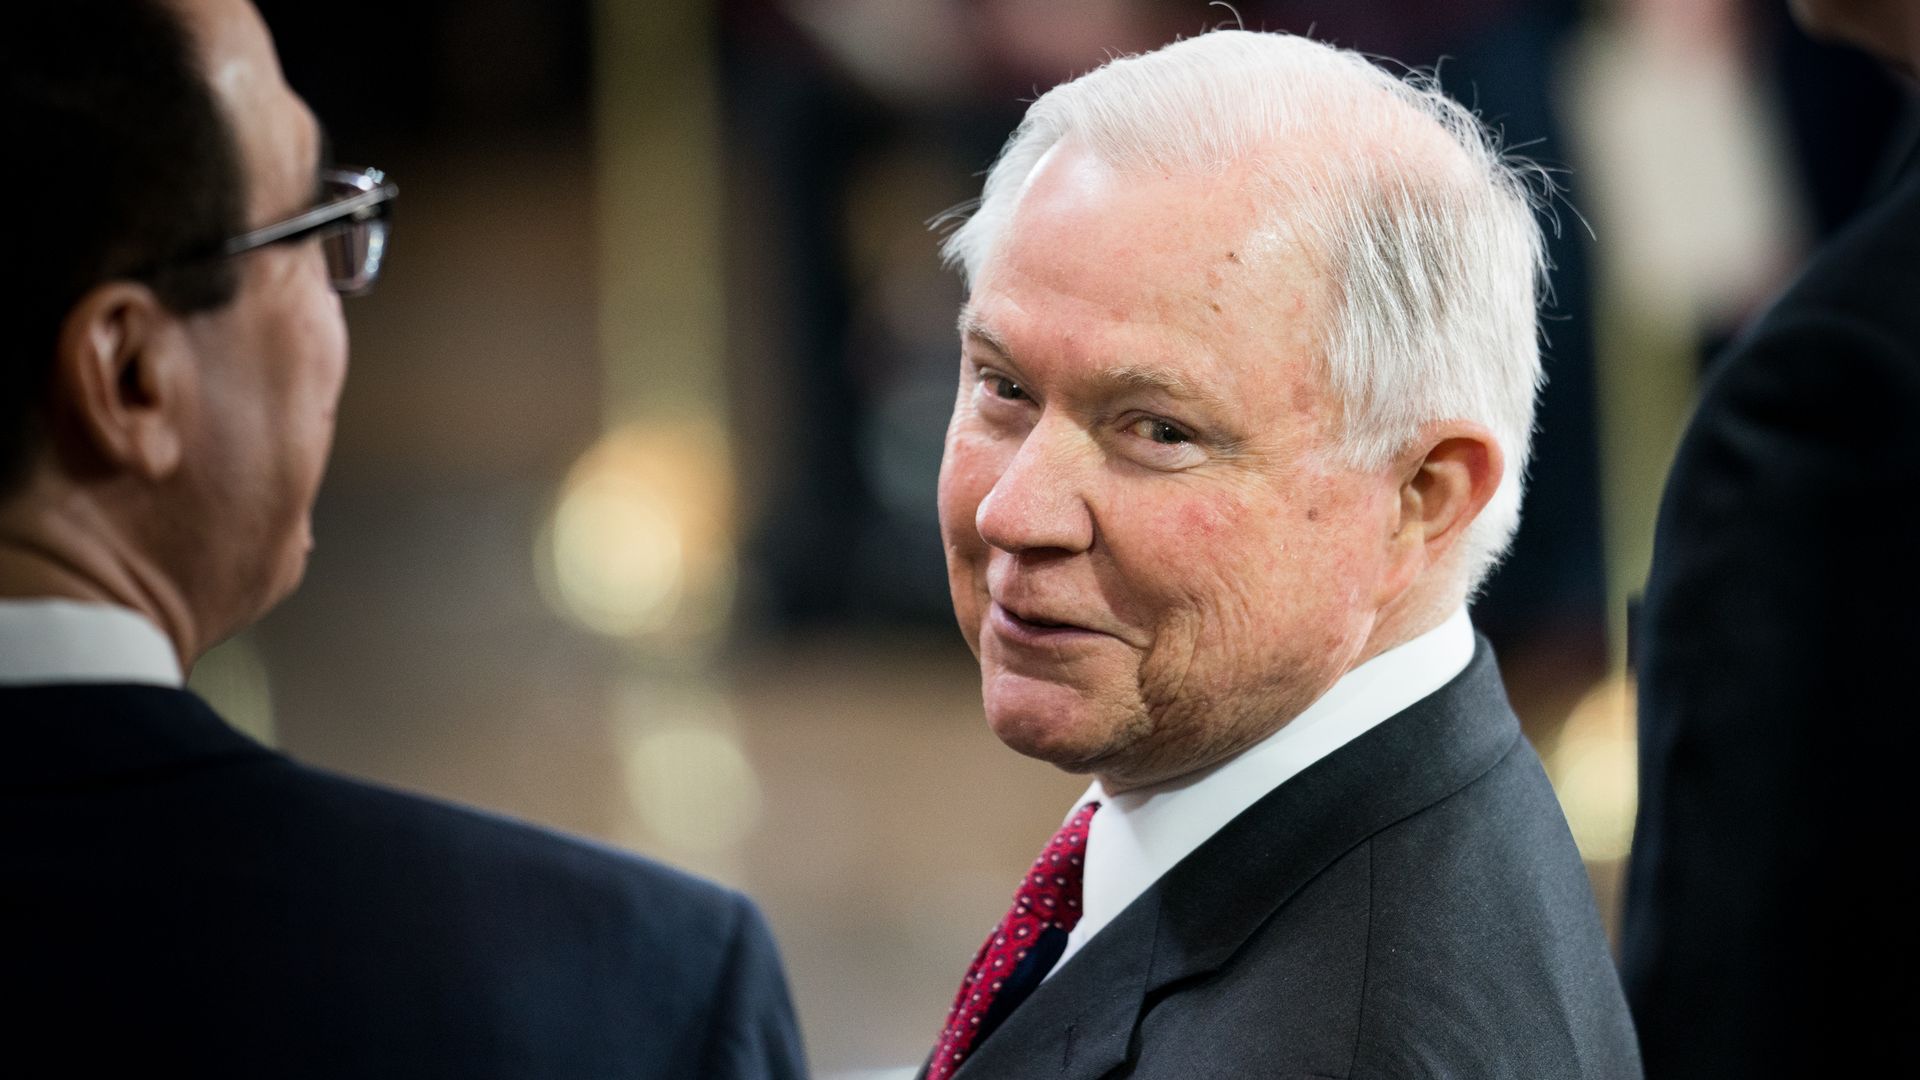 Jeff Sessions looks back over his shoulder